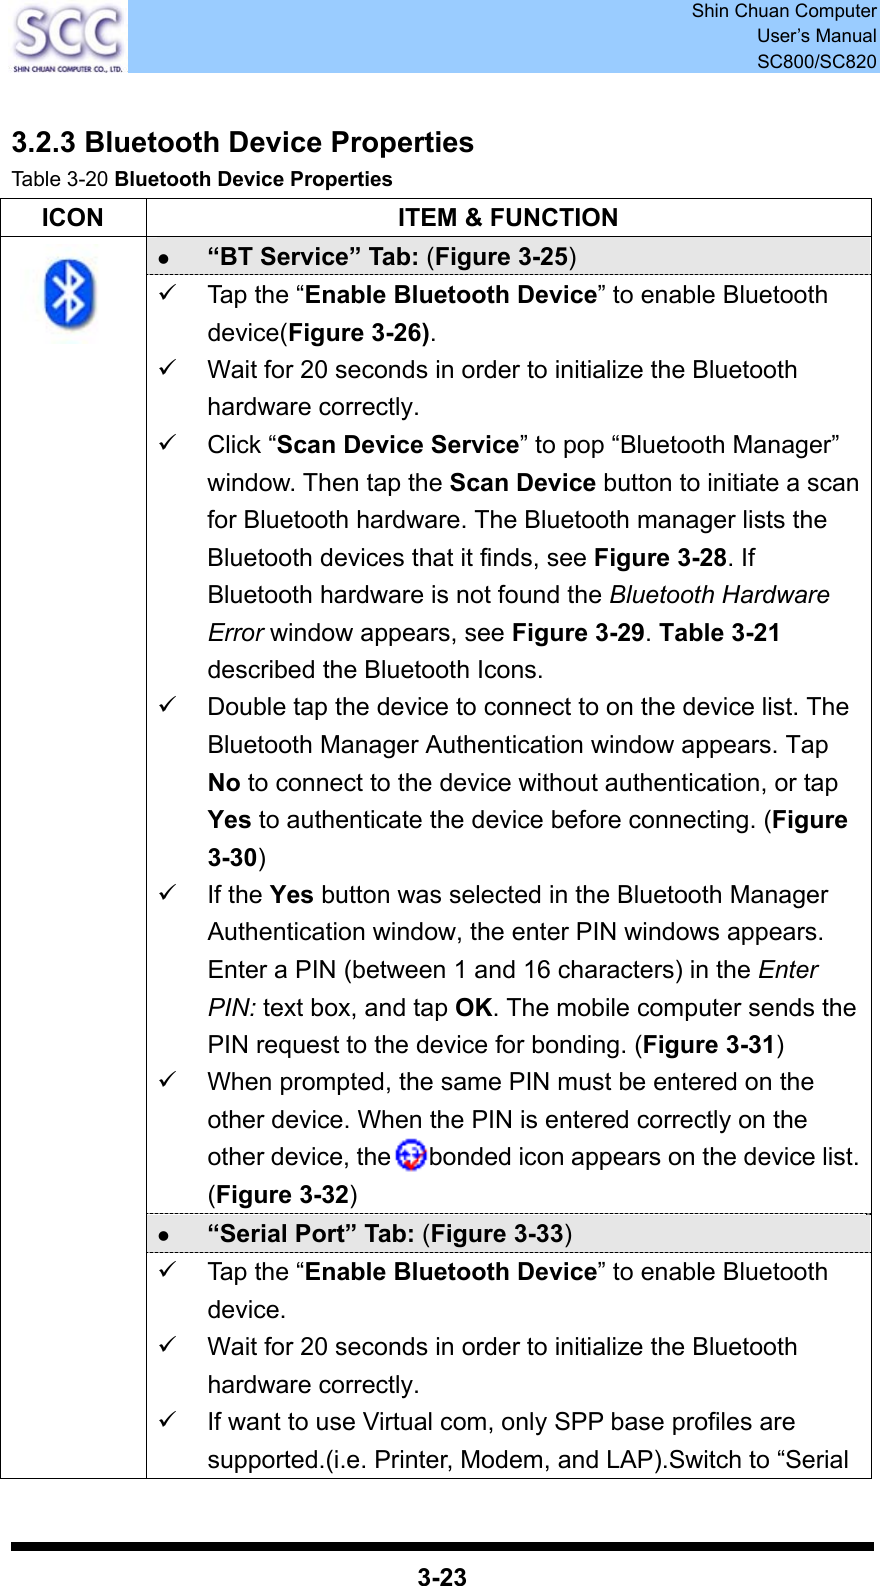  Shin Chuan Computer User’s Manual SC800/SC820  3-23  3.2.3 Bluetooth Device Properties Table 3-20 Bluetooth Device Properties ICON  ITEM &amp; FUNCTION z “BT Service” Tab: (Figure 3-25) 9  Tap the “Enable Bluetooth Device” to enable Bluetooth device(Figure 3-26). 9  Wait for 20 seconds in order to initialize the Bluetooth hardware correctly. 9 Click “Scan Device Service” to pop “Bluetooth Manager” window. Then tap the Scan Device button to initiate a scan for Bluetooth hardware. The Bluetooth manager lists the Bluetooth devices that it finds, see Figure 3-28. If Bluetooth hardware is not found the Bluetooth Hardware Error window appears, see Figure 3-29. Table 3-21 described the Bluetooth Icons. 9  Double tap the device to connect to on the device list. The Bluetooth Manager Authentication window appears. Tap No to connect to the device without authentication, or tap Yes to authenticate the device before connecting. (Figure 3-30) 9 If the Yes button was selected in the Bluetooth Manager Authentication window, the enter PIN windows appears. Enter a PIN (between 1 and 16 characters) in the Enter PIN: text box, and tap OK. The mobile computer sends the PIN request to the device for bonding. (Figure 3-31) 9  When prompted, the same PIN must be entered on the other device. When the PIN is entered correctly on the other device, the   bonded icon appears on the device list. (Figure 3-32) z “Serial Port” Tab: (Figure 3-33)  9  Tap the “Enable Bluetooth Device” to enable Bluetooth device. 9  Wait for 20 seconds in order to initialize the Bluetooth hardware correctly. 9  If want to use Virtual com, only SPP base profiles are supported.(i.e. Printer, Modem, and LAP).Switch to “Serial 